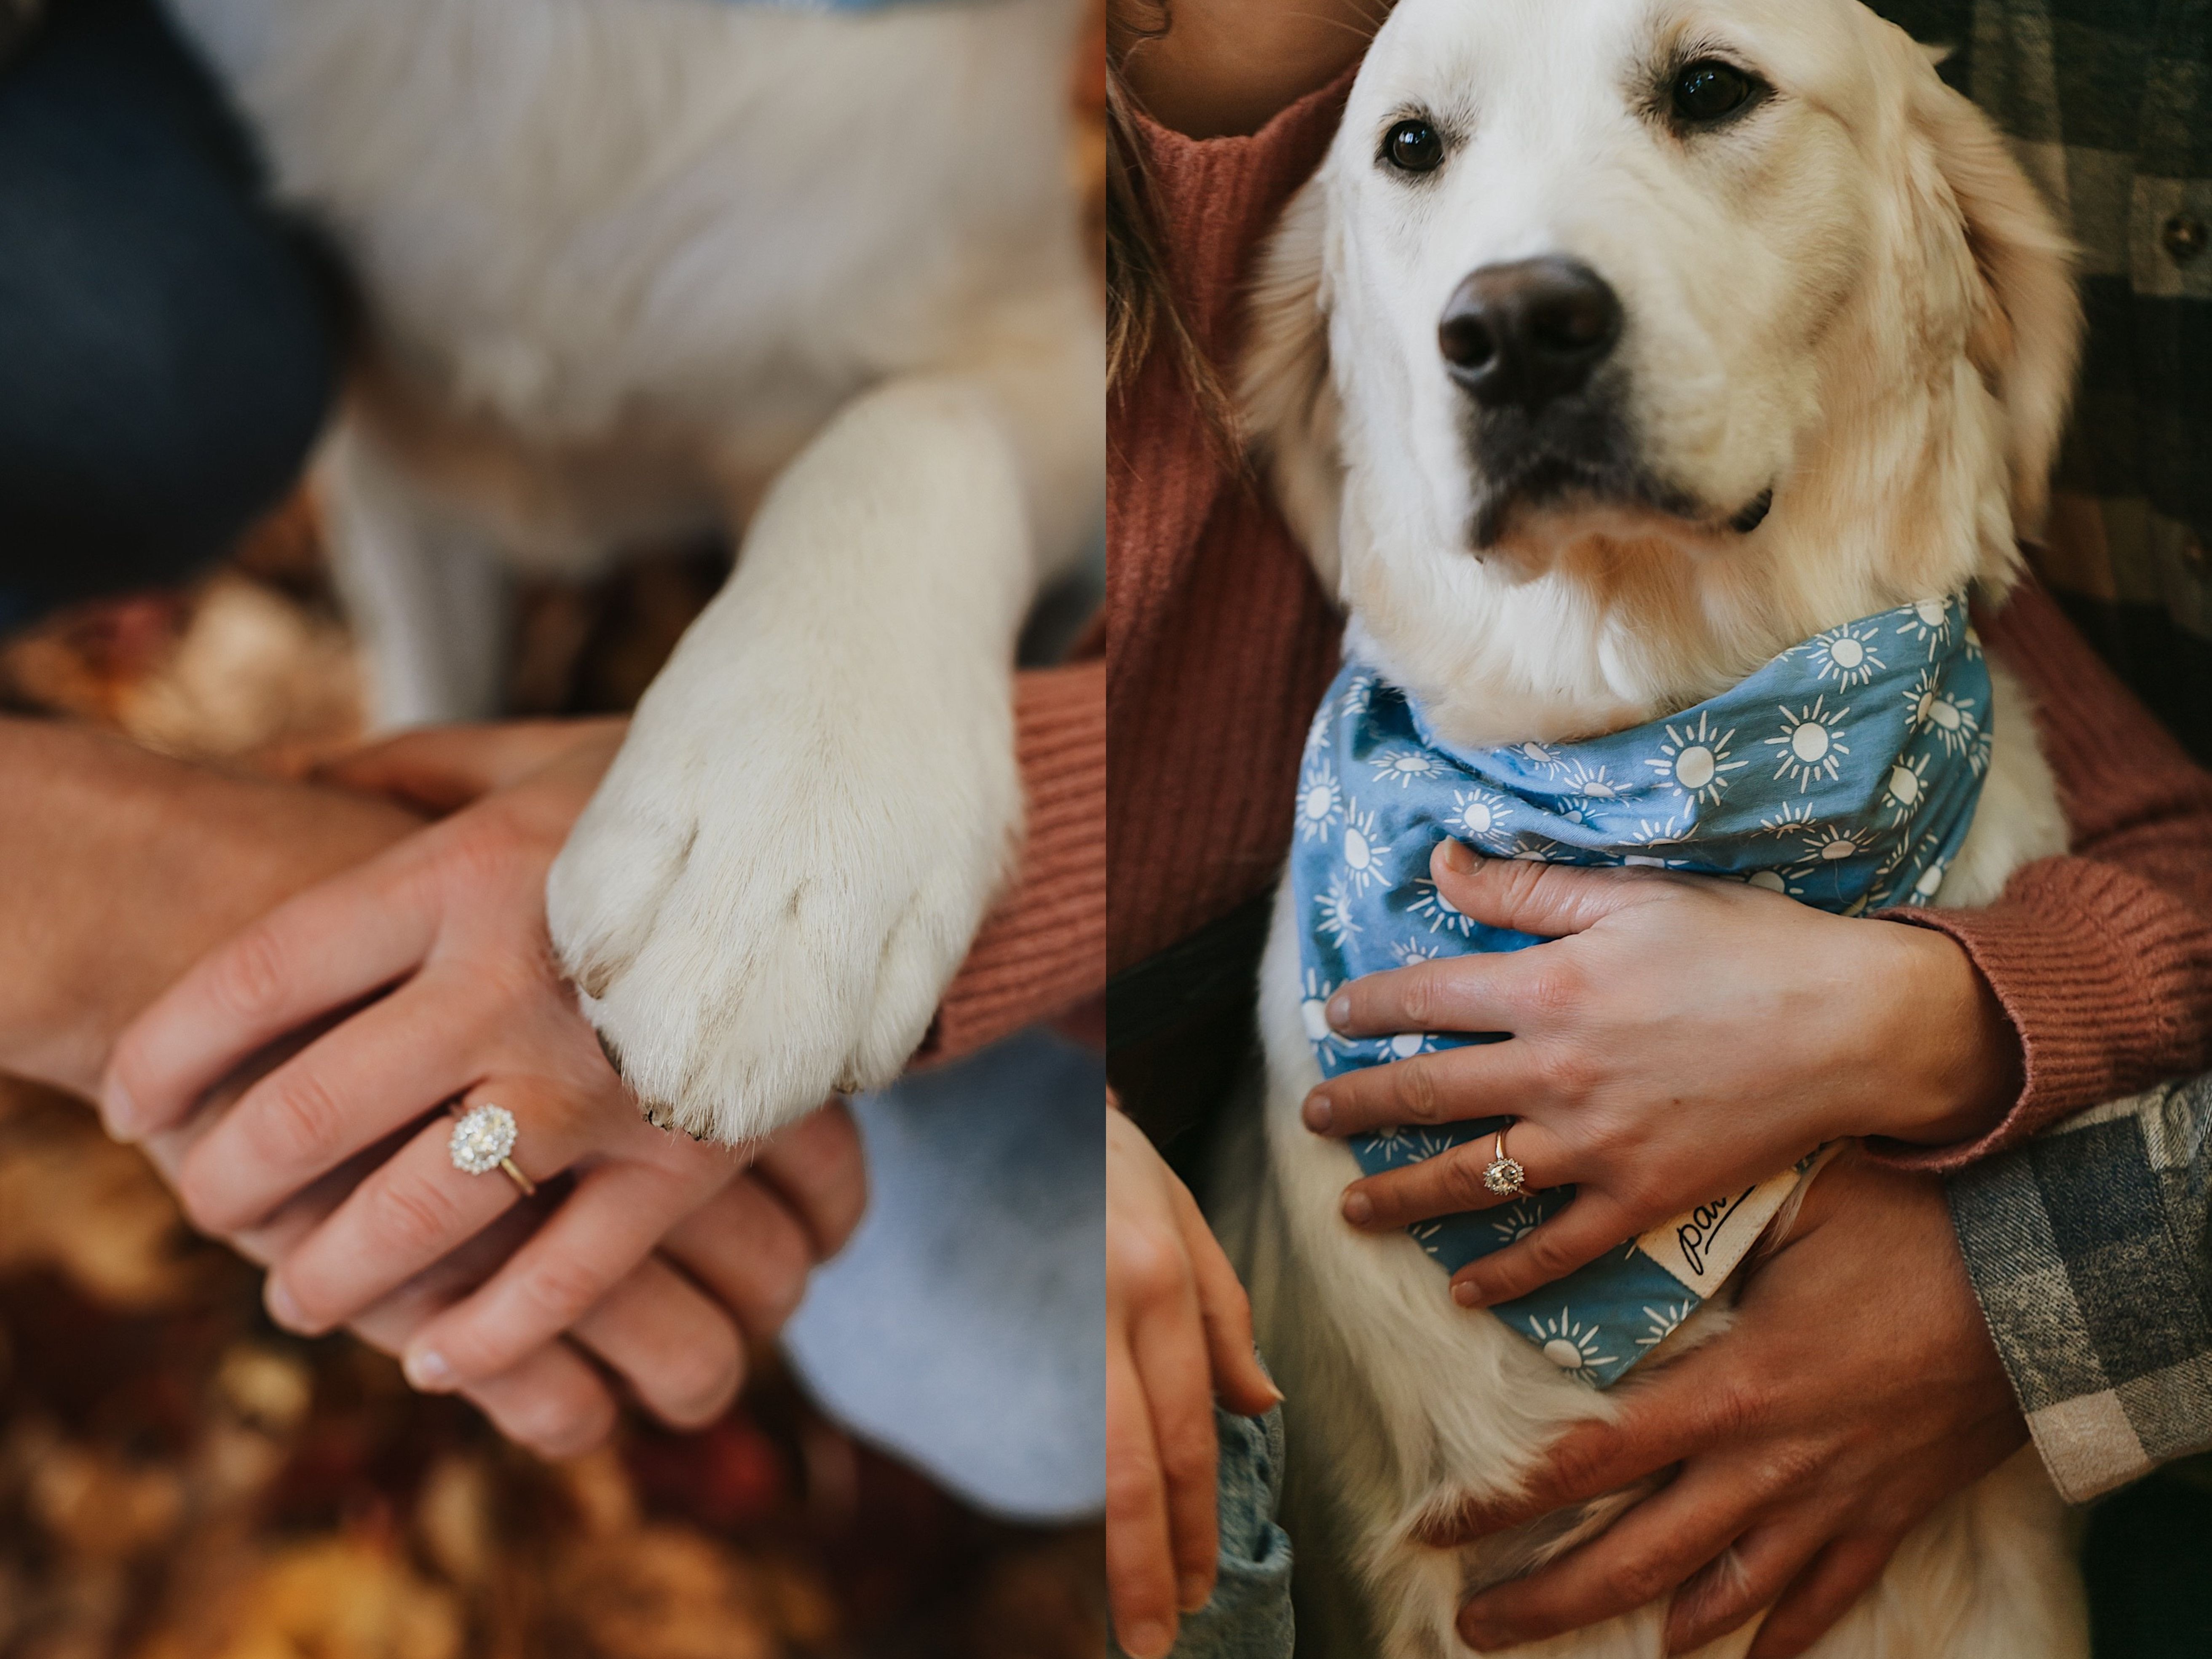 Two photos side by side, the left is a close up of a couple holding hands with an engagement ring on the woman's finger and a dogs paw resting atop the two, the right photo is a close up of the dog's face with his owner's behind him and the woman's hand with the engagement ring resting on the dogs chest